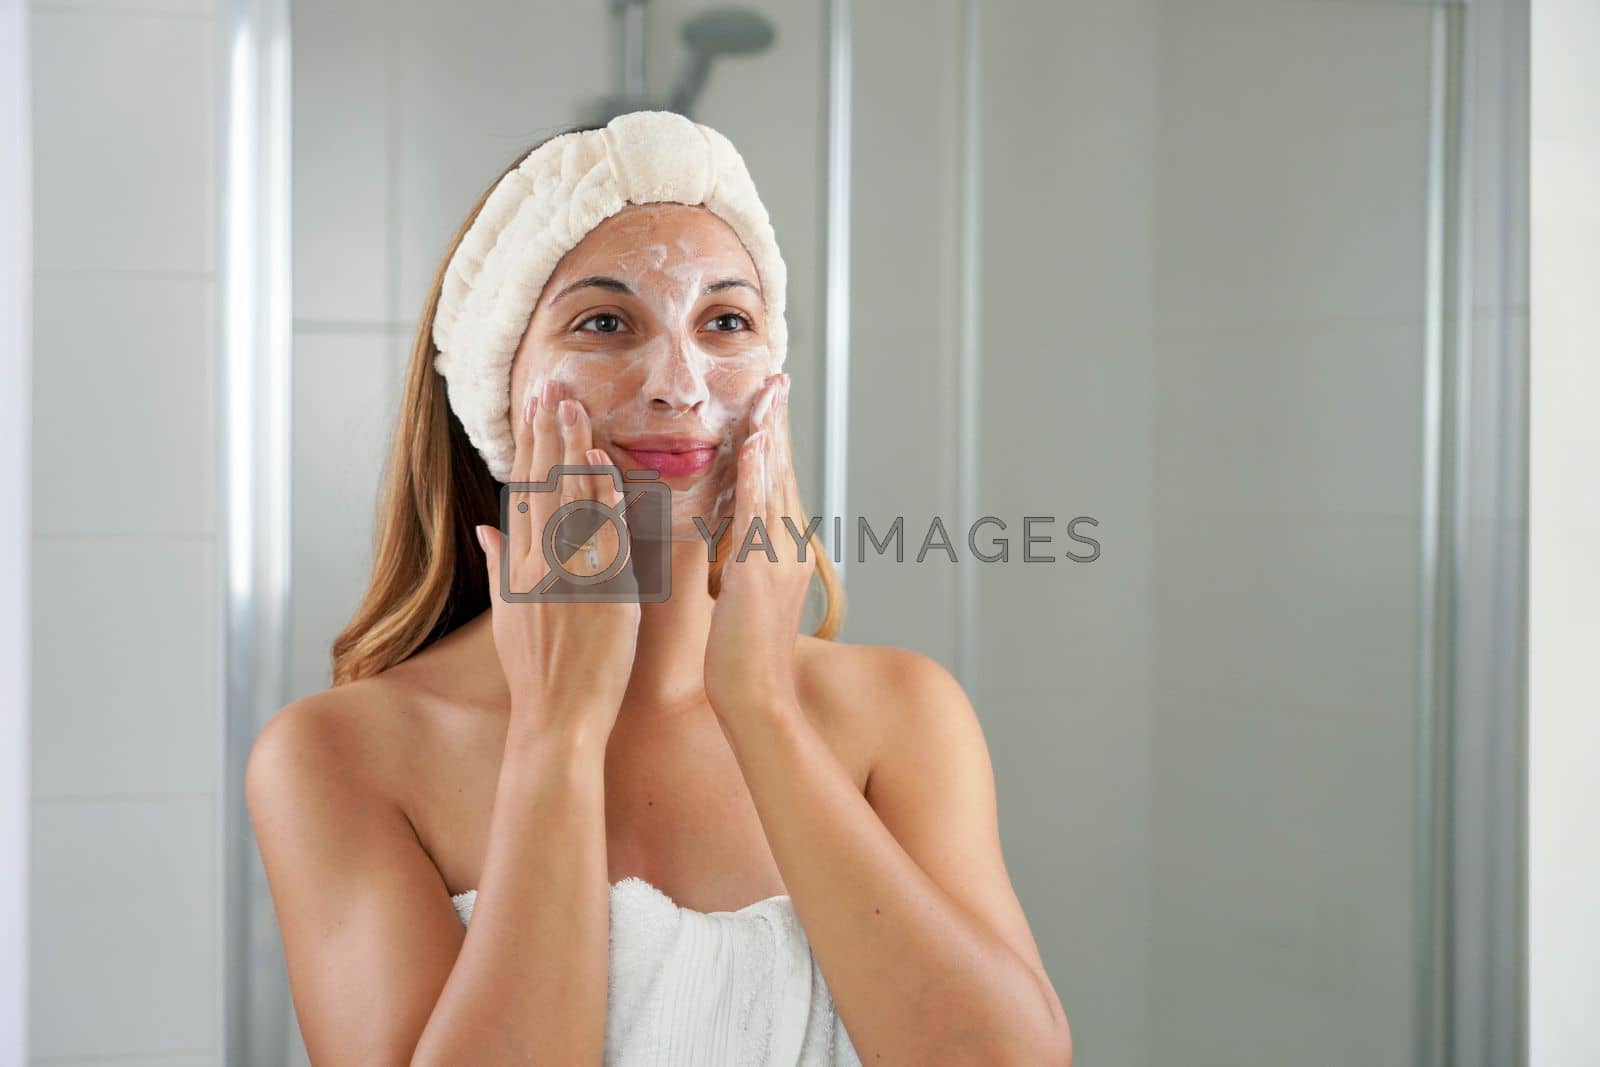 Royalty free image of Skincare woman washing face foaming soap scrubbing skin. Face wash exfoliation scrub soap woman washing scrubbing with skincare cleansing product. Enjoying relaxing time. by sergio_monti